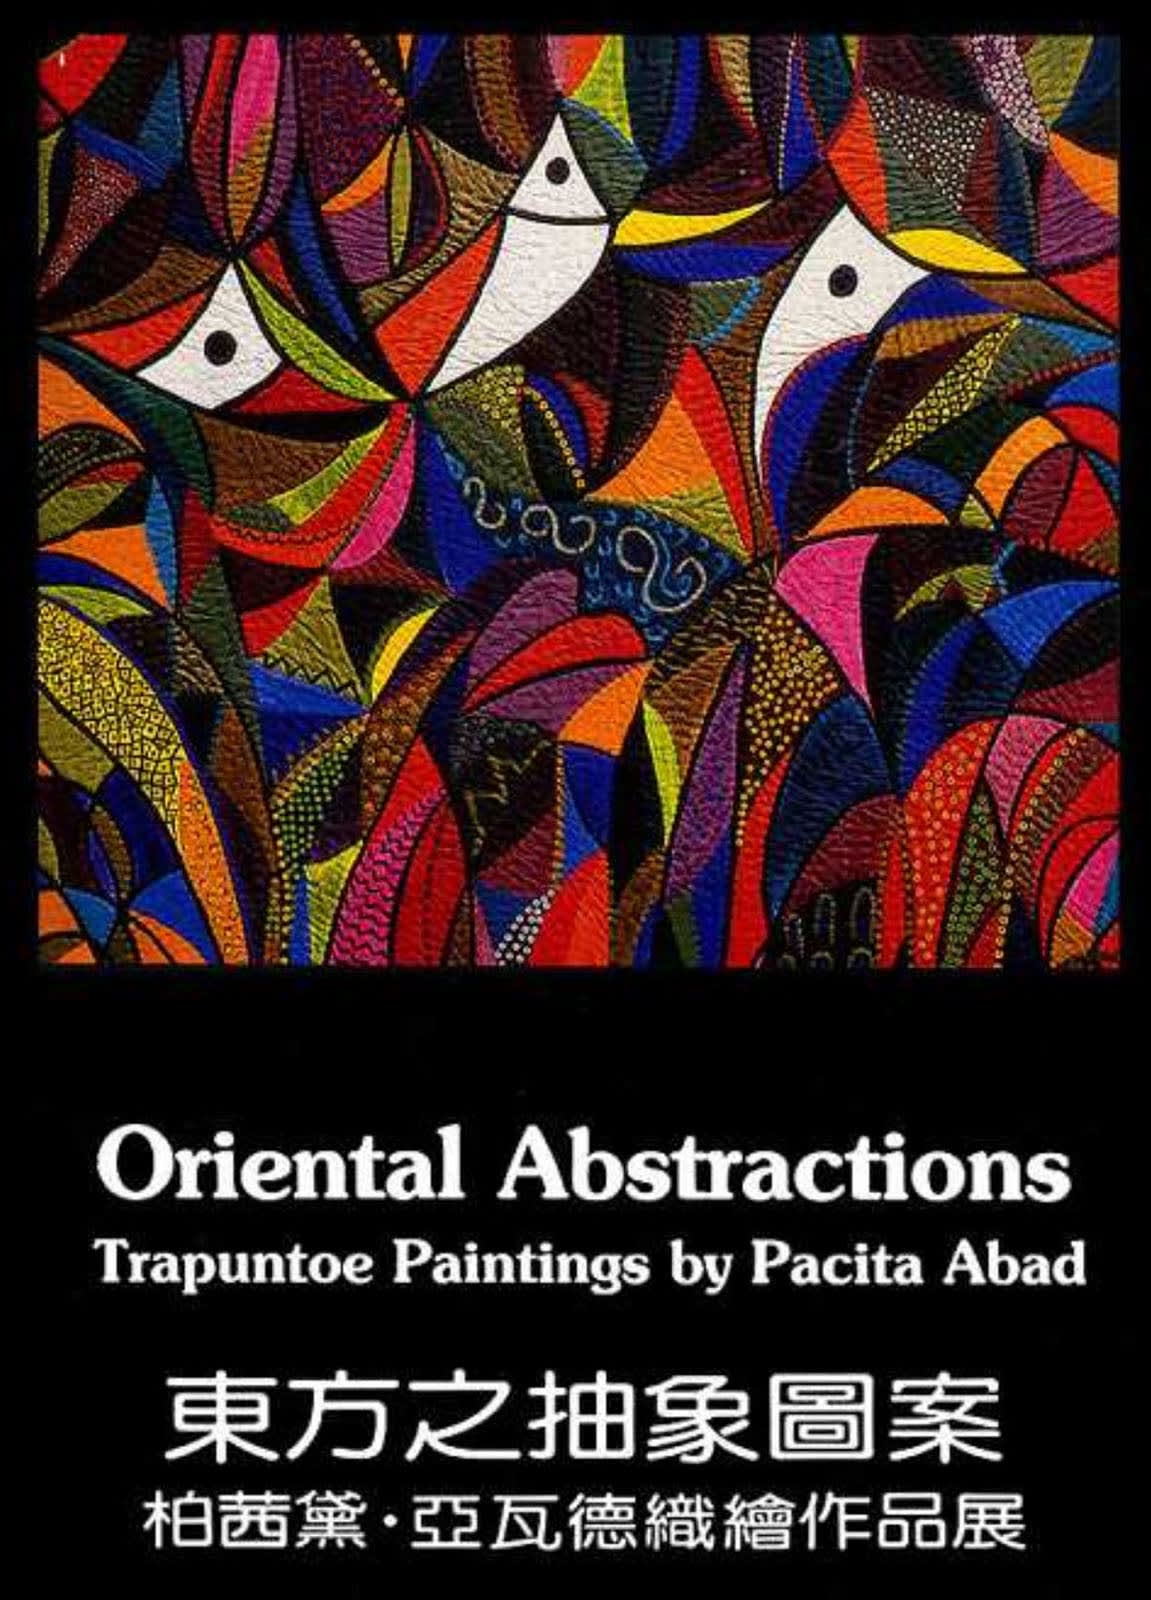 Pacita Abad: Oriental Abstractions